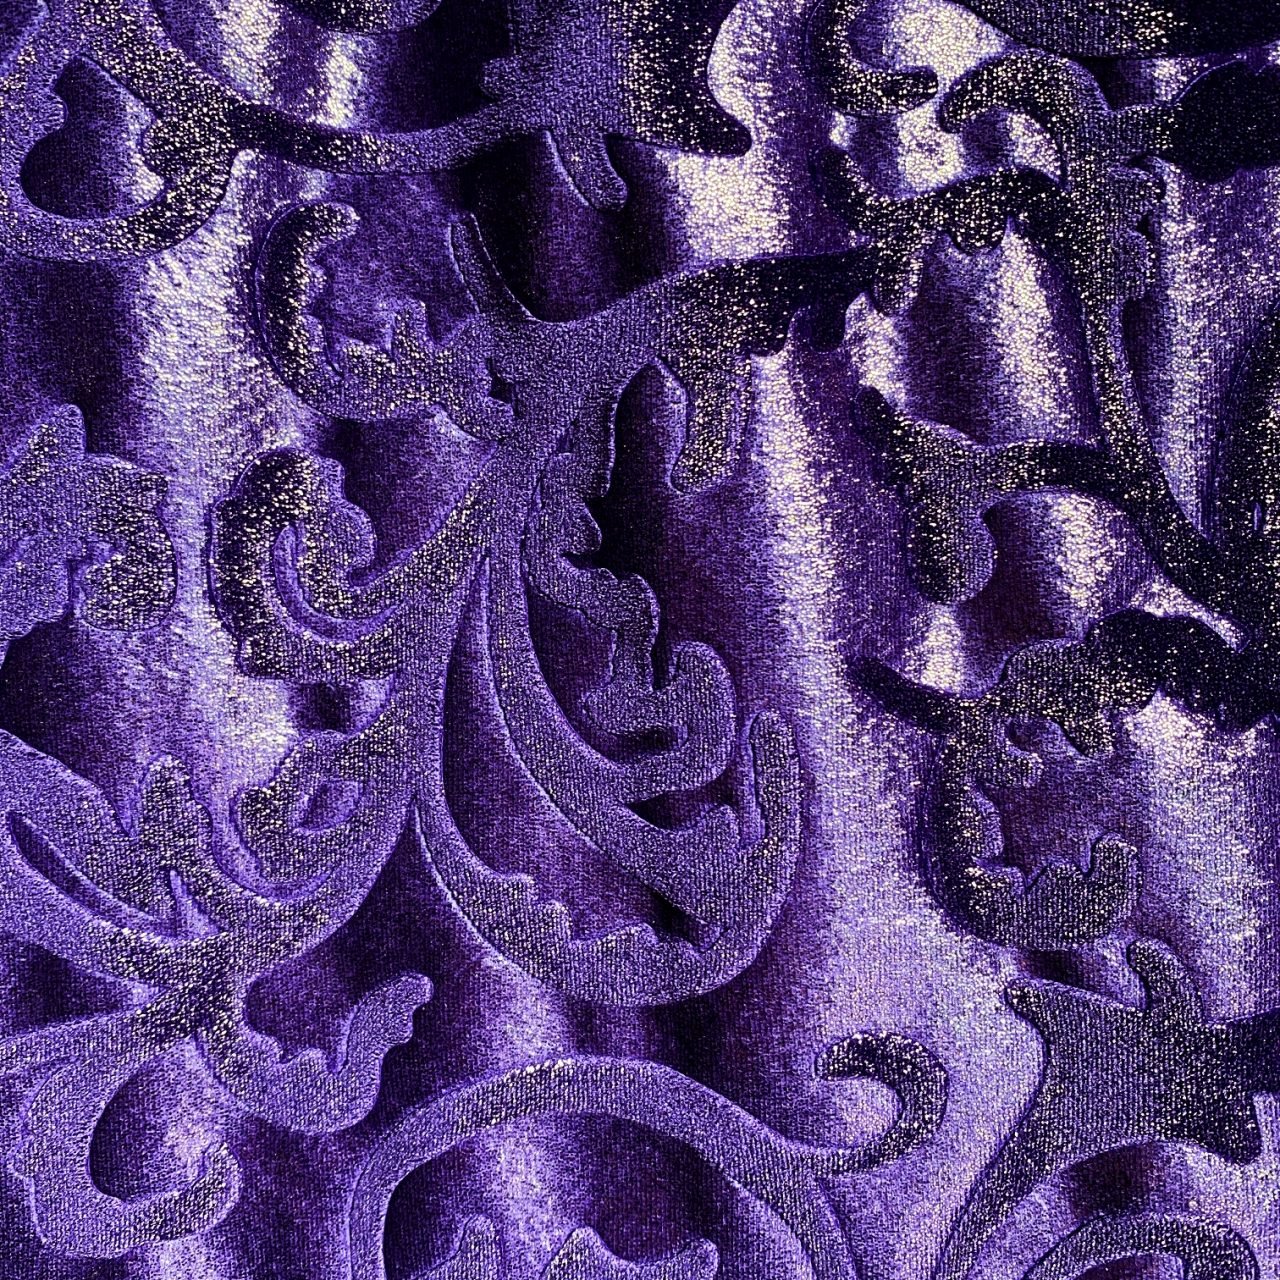 Stretch Lace in Metallic Plum - All About Fabrics